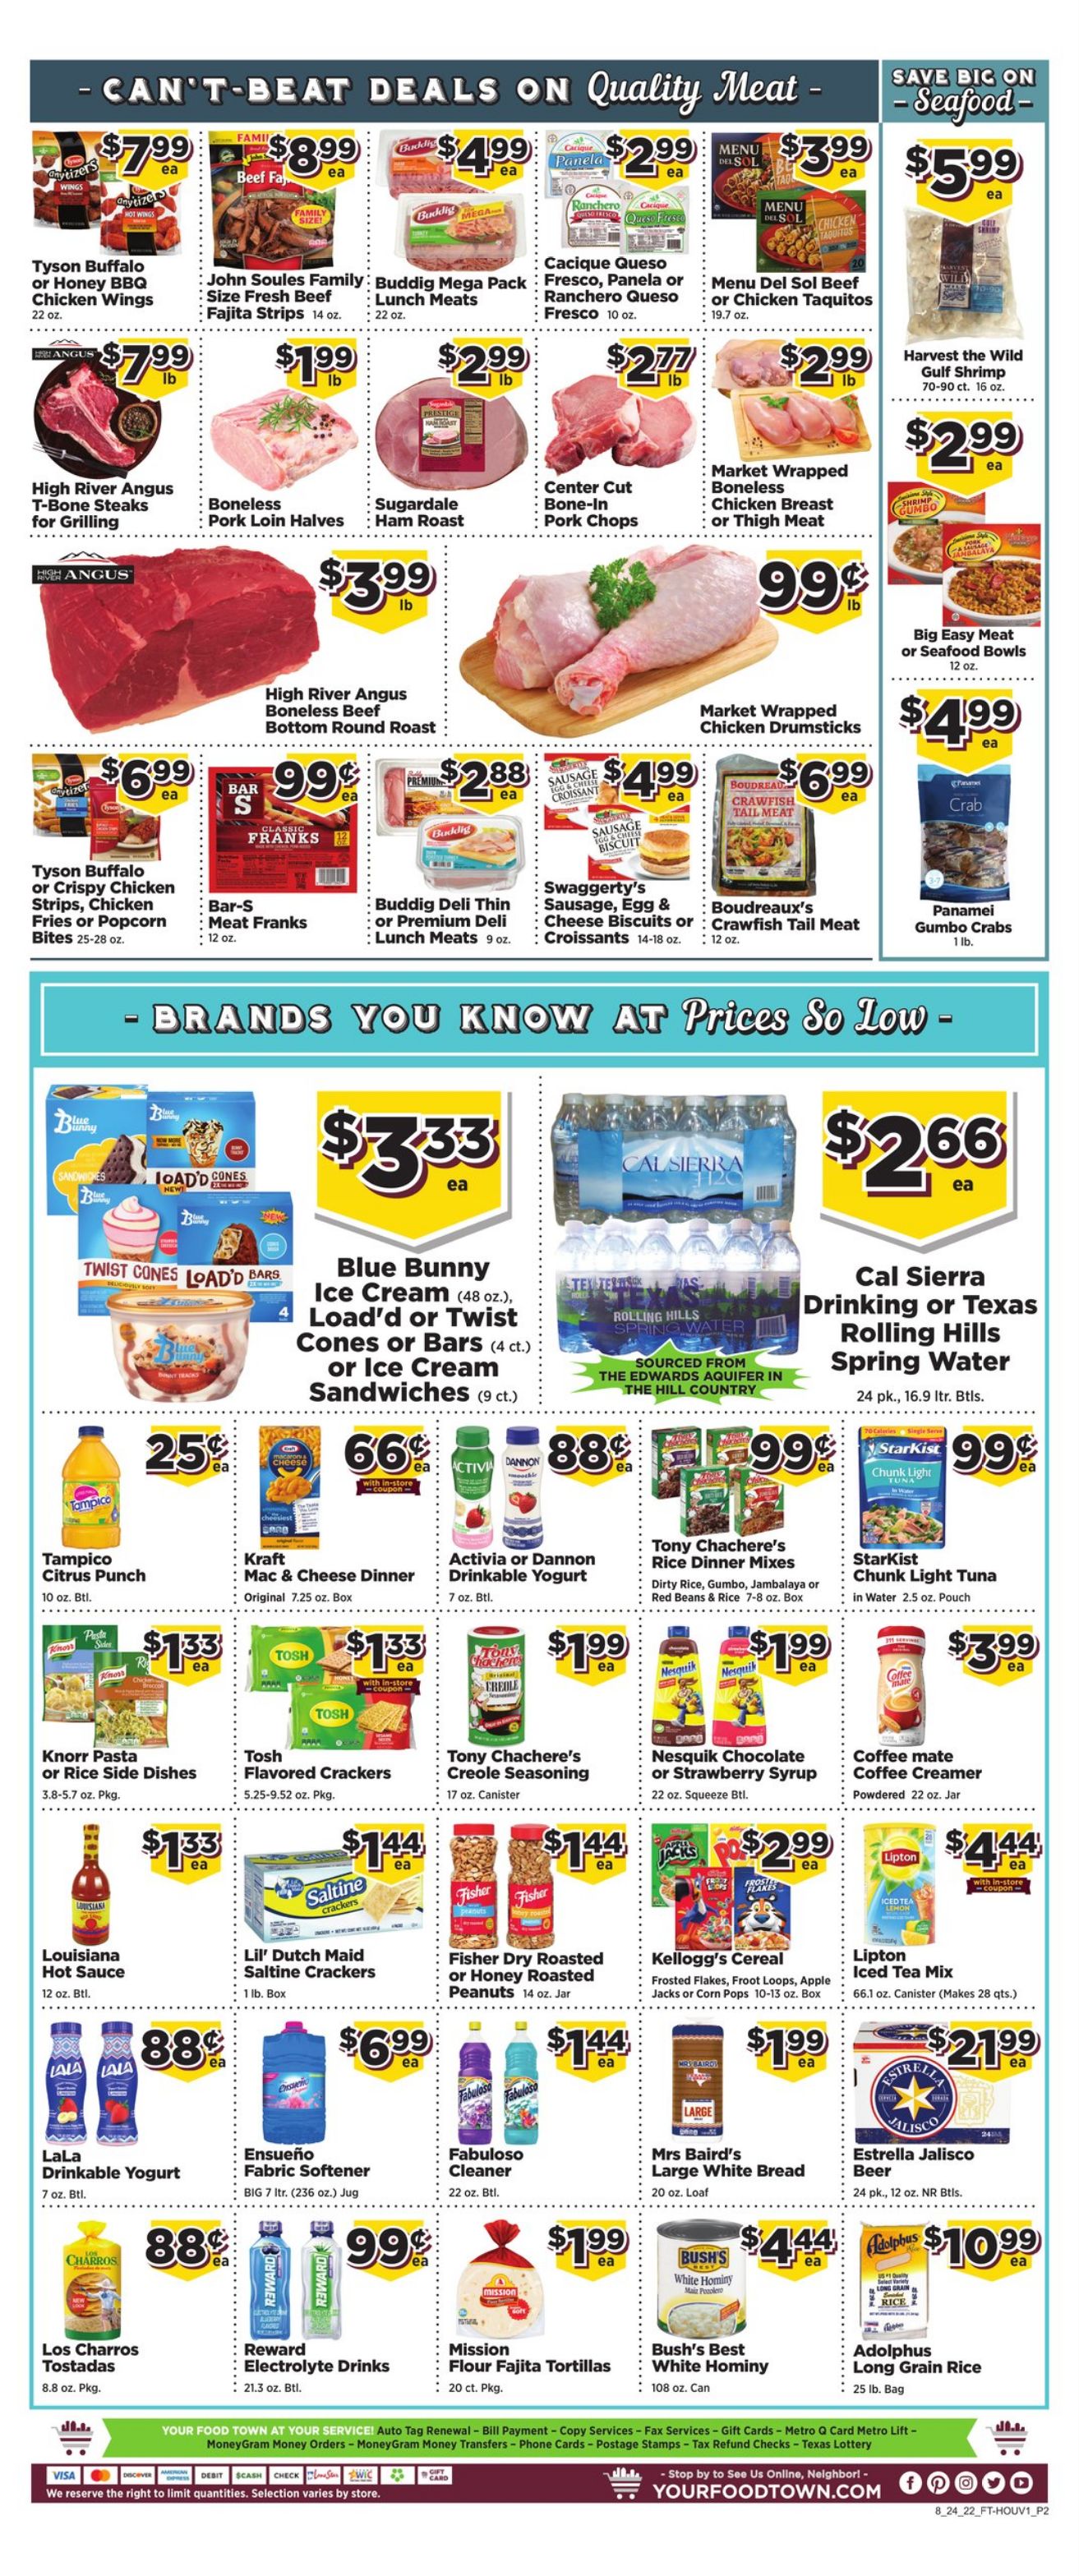 Weekly ad Your Food Town 08/24/2022 - 08/30/2022